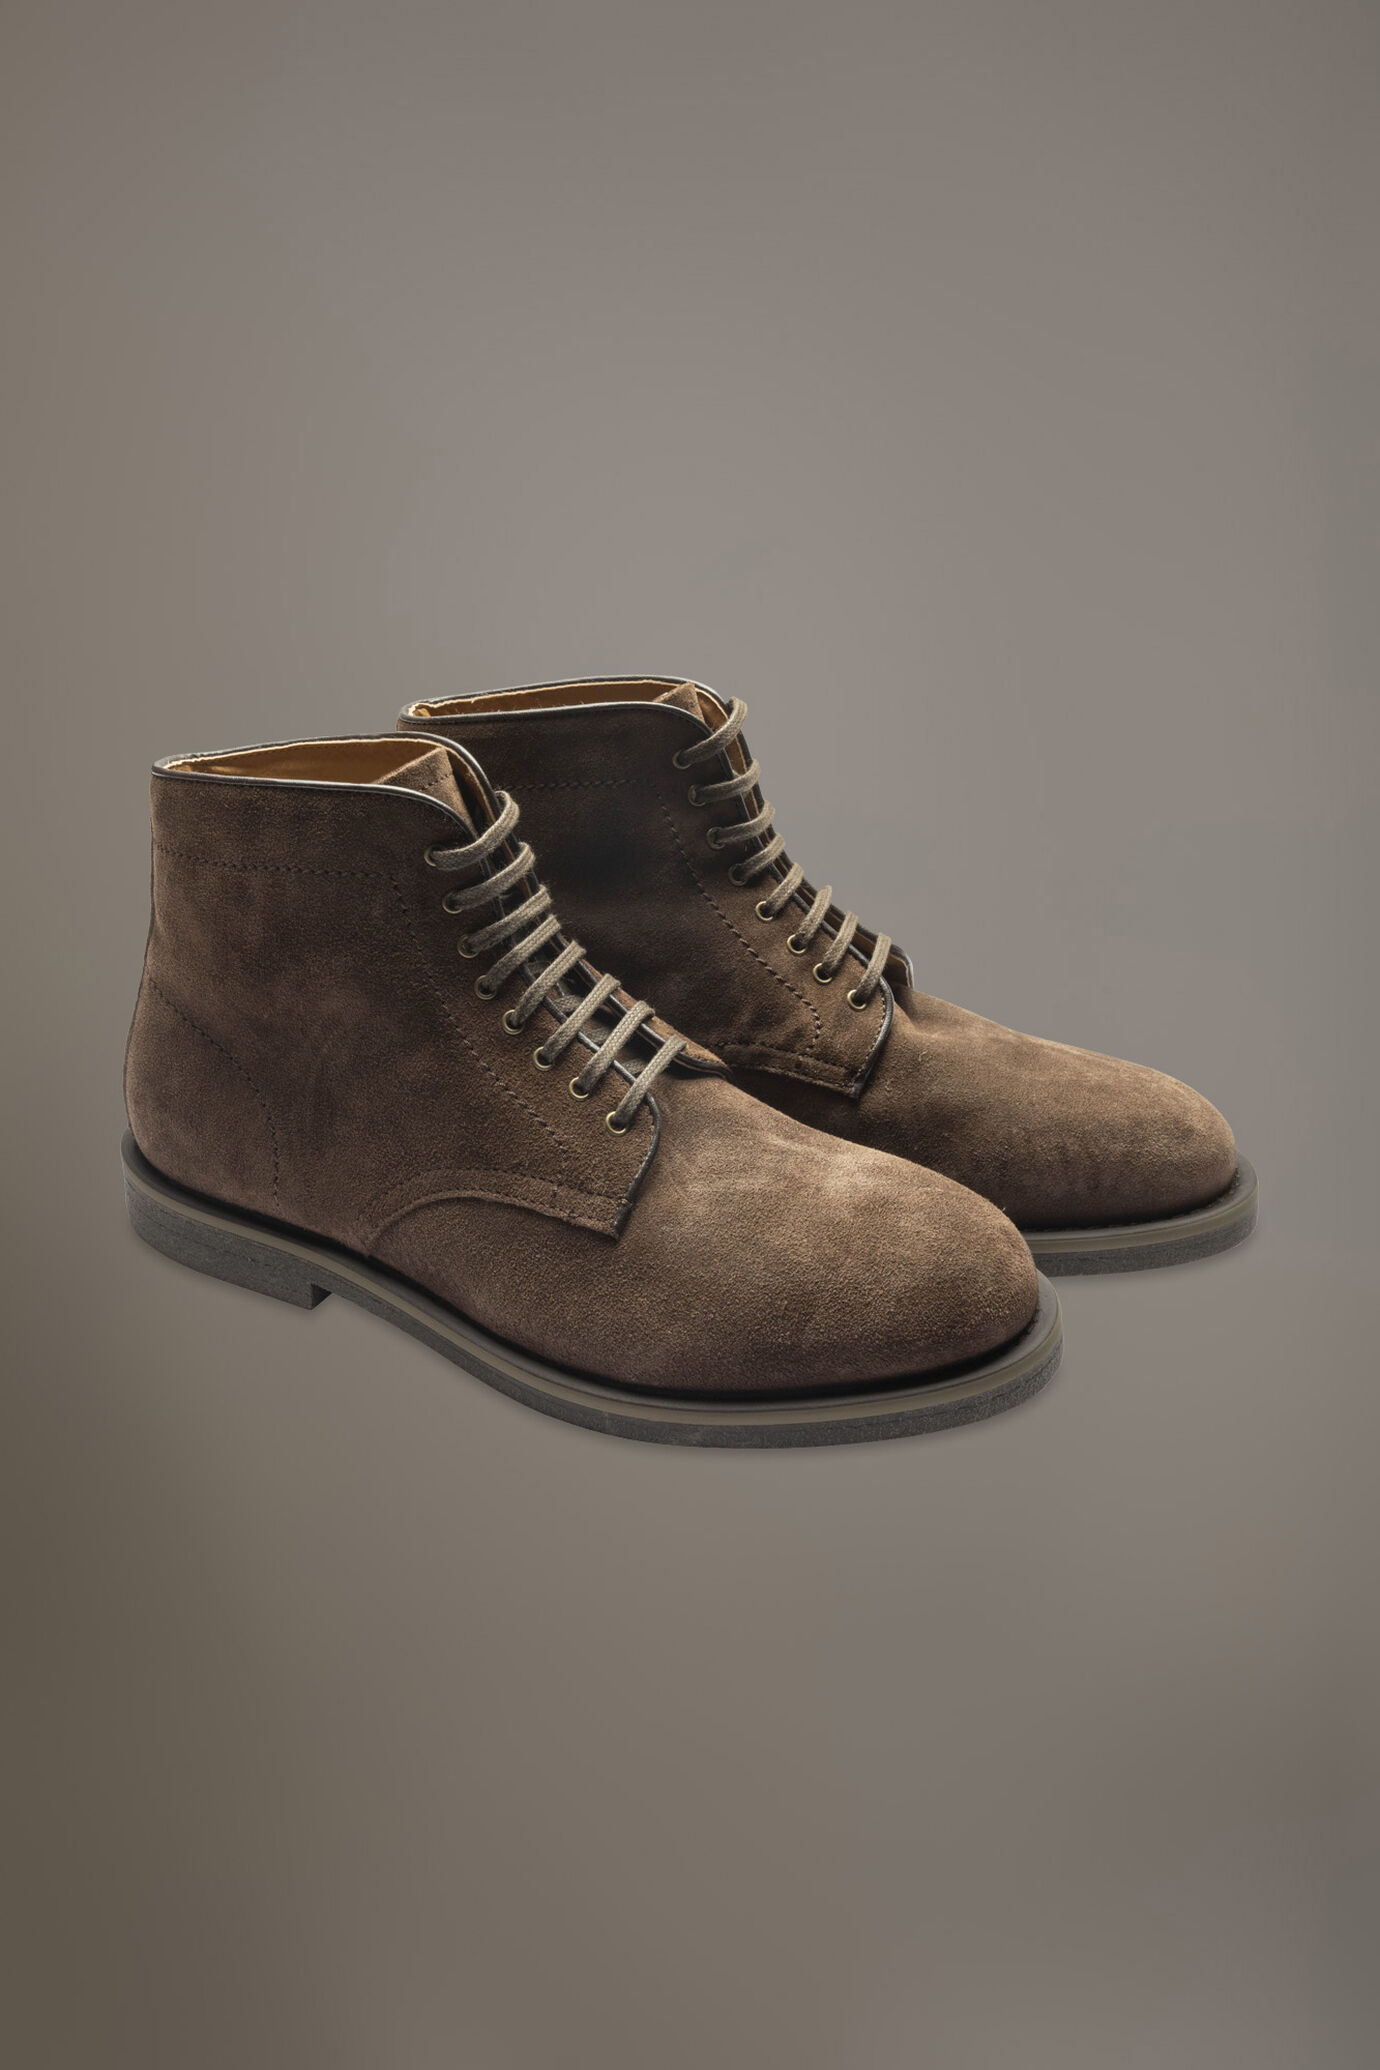 100% suede leather boots with rubber sole